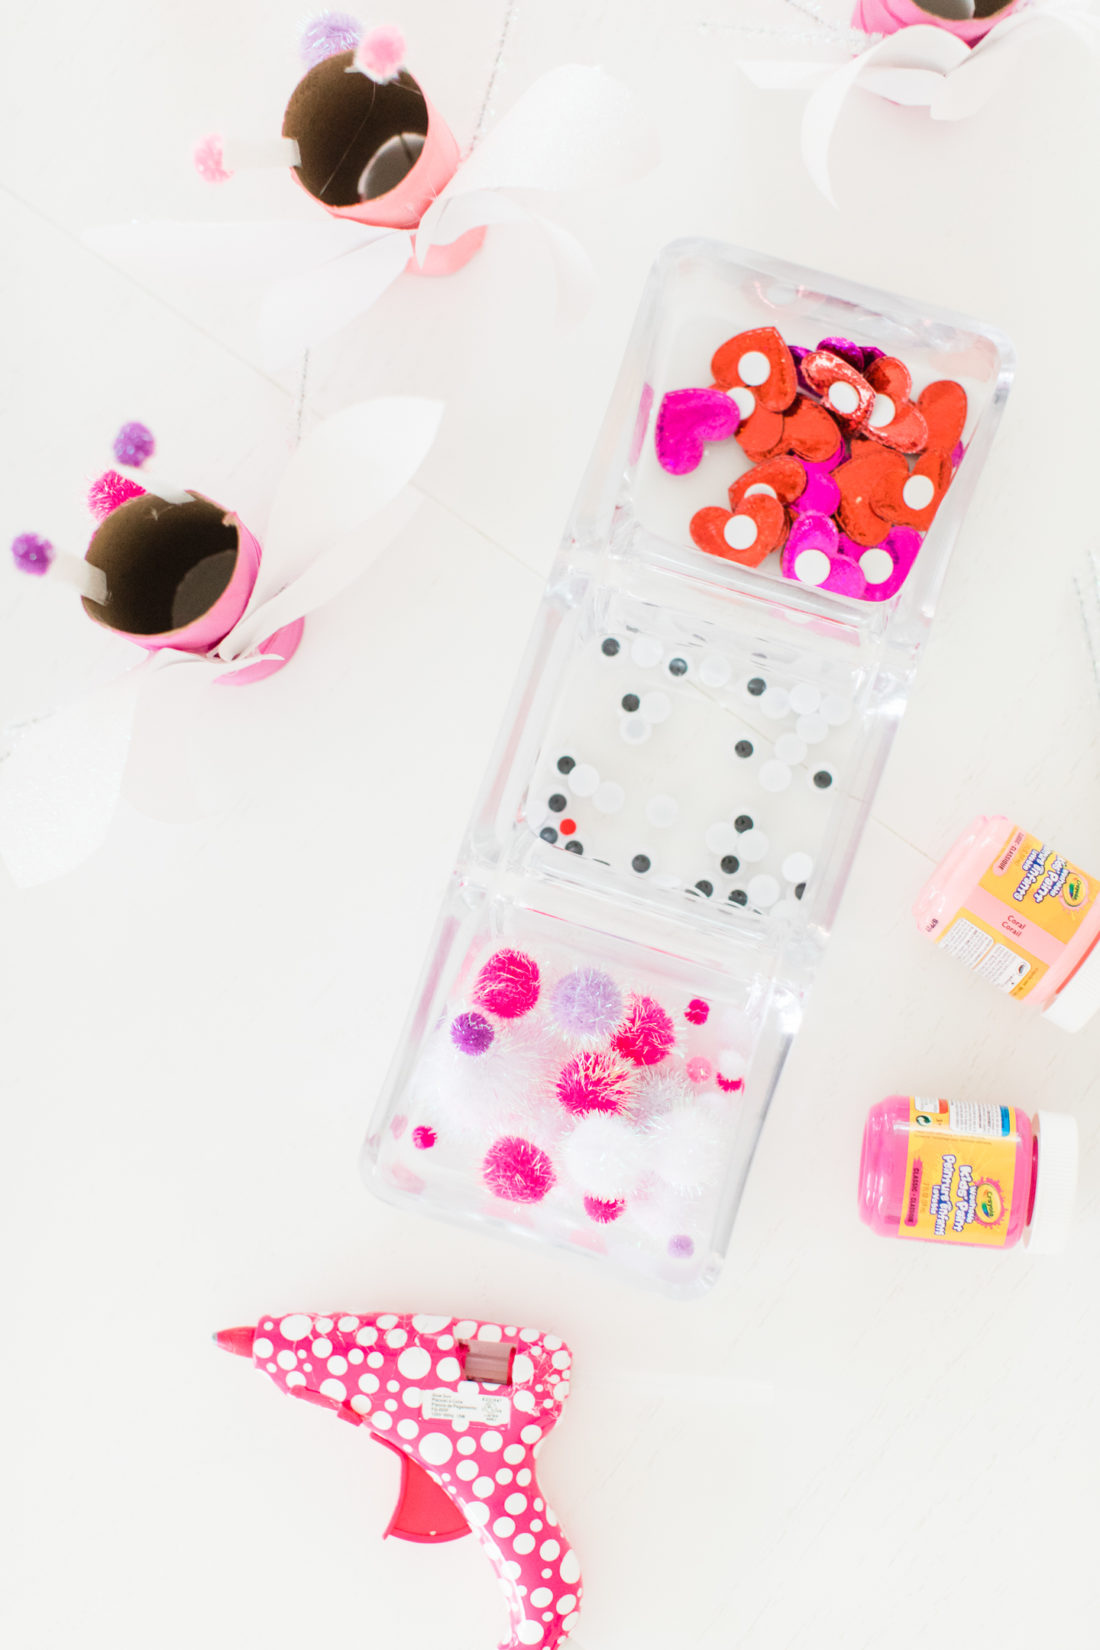 Pink, white, red, and sparkly materials to create DIY lovebugs